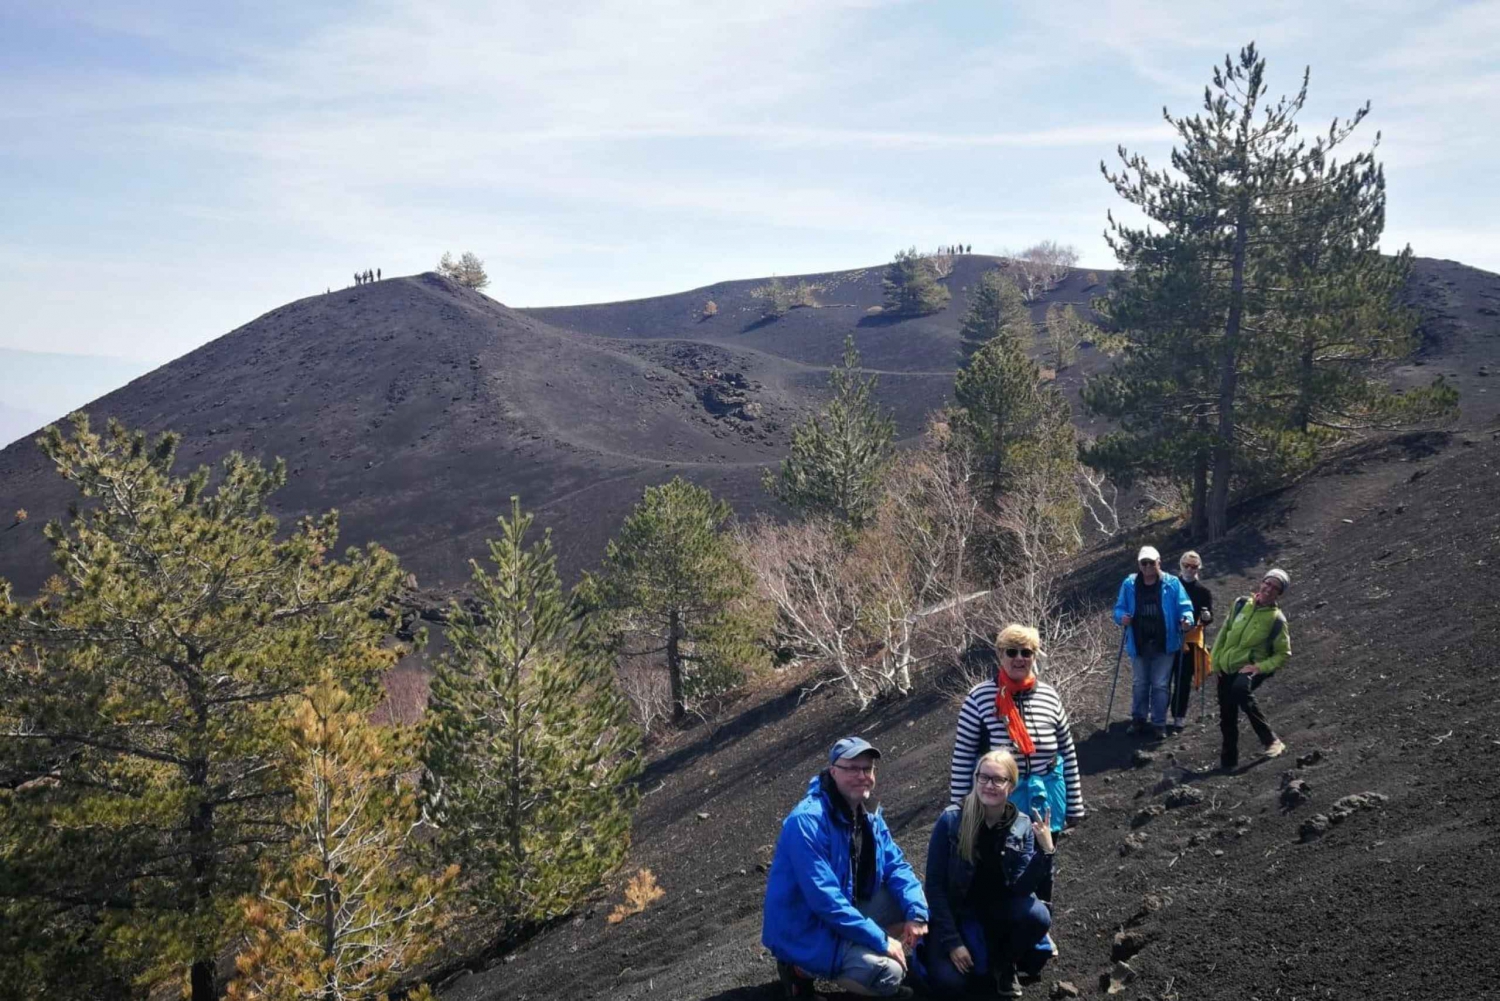 Guided trekking on Etna Volcano with transfer from Syracuse